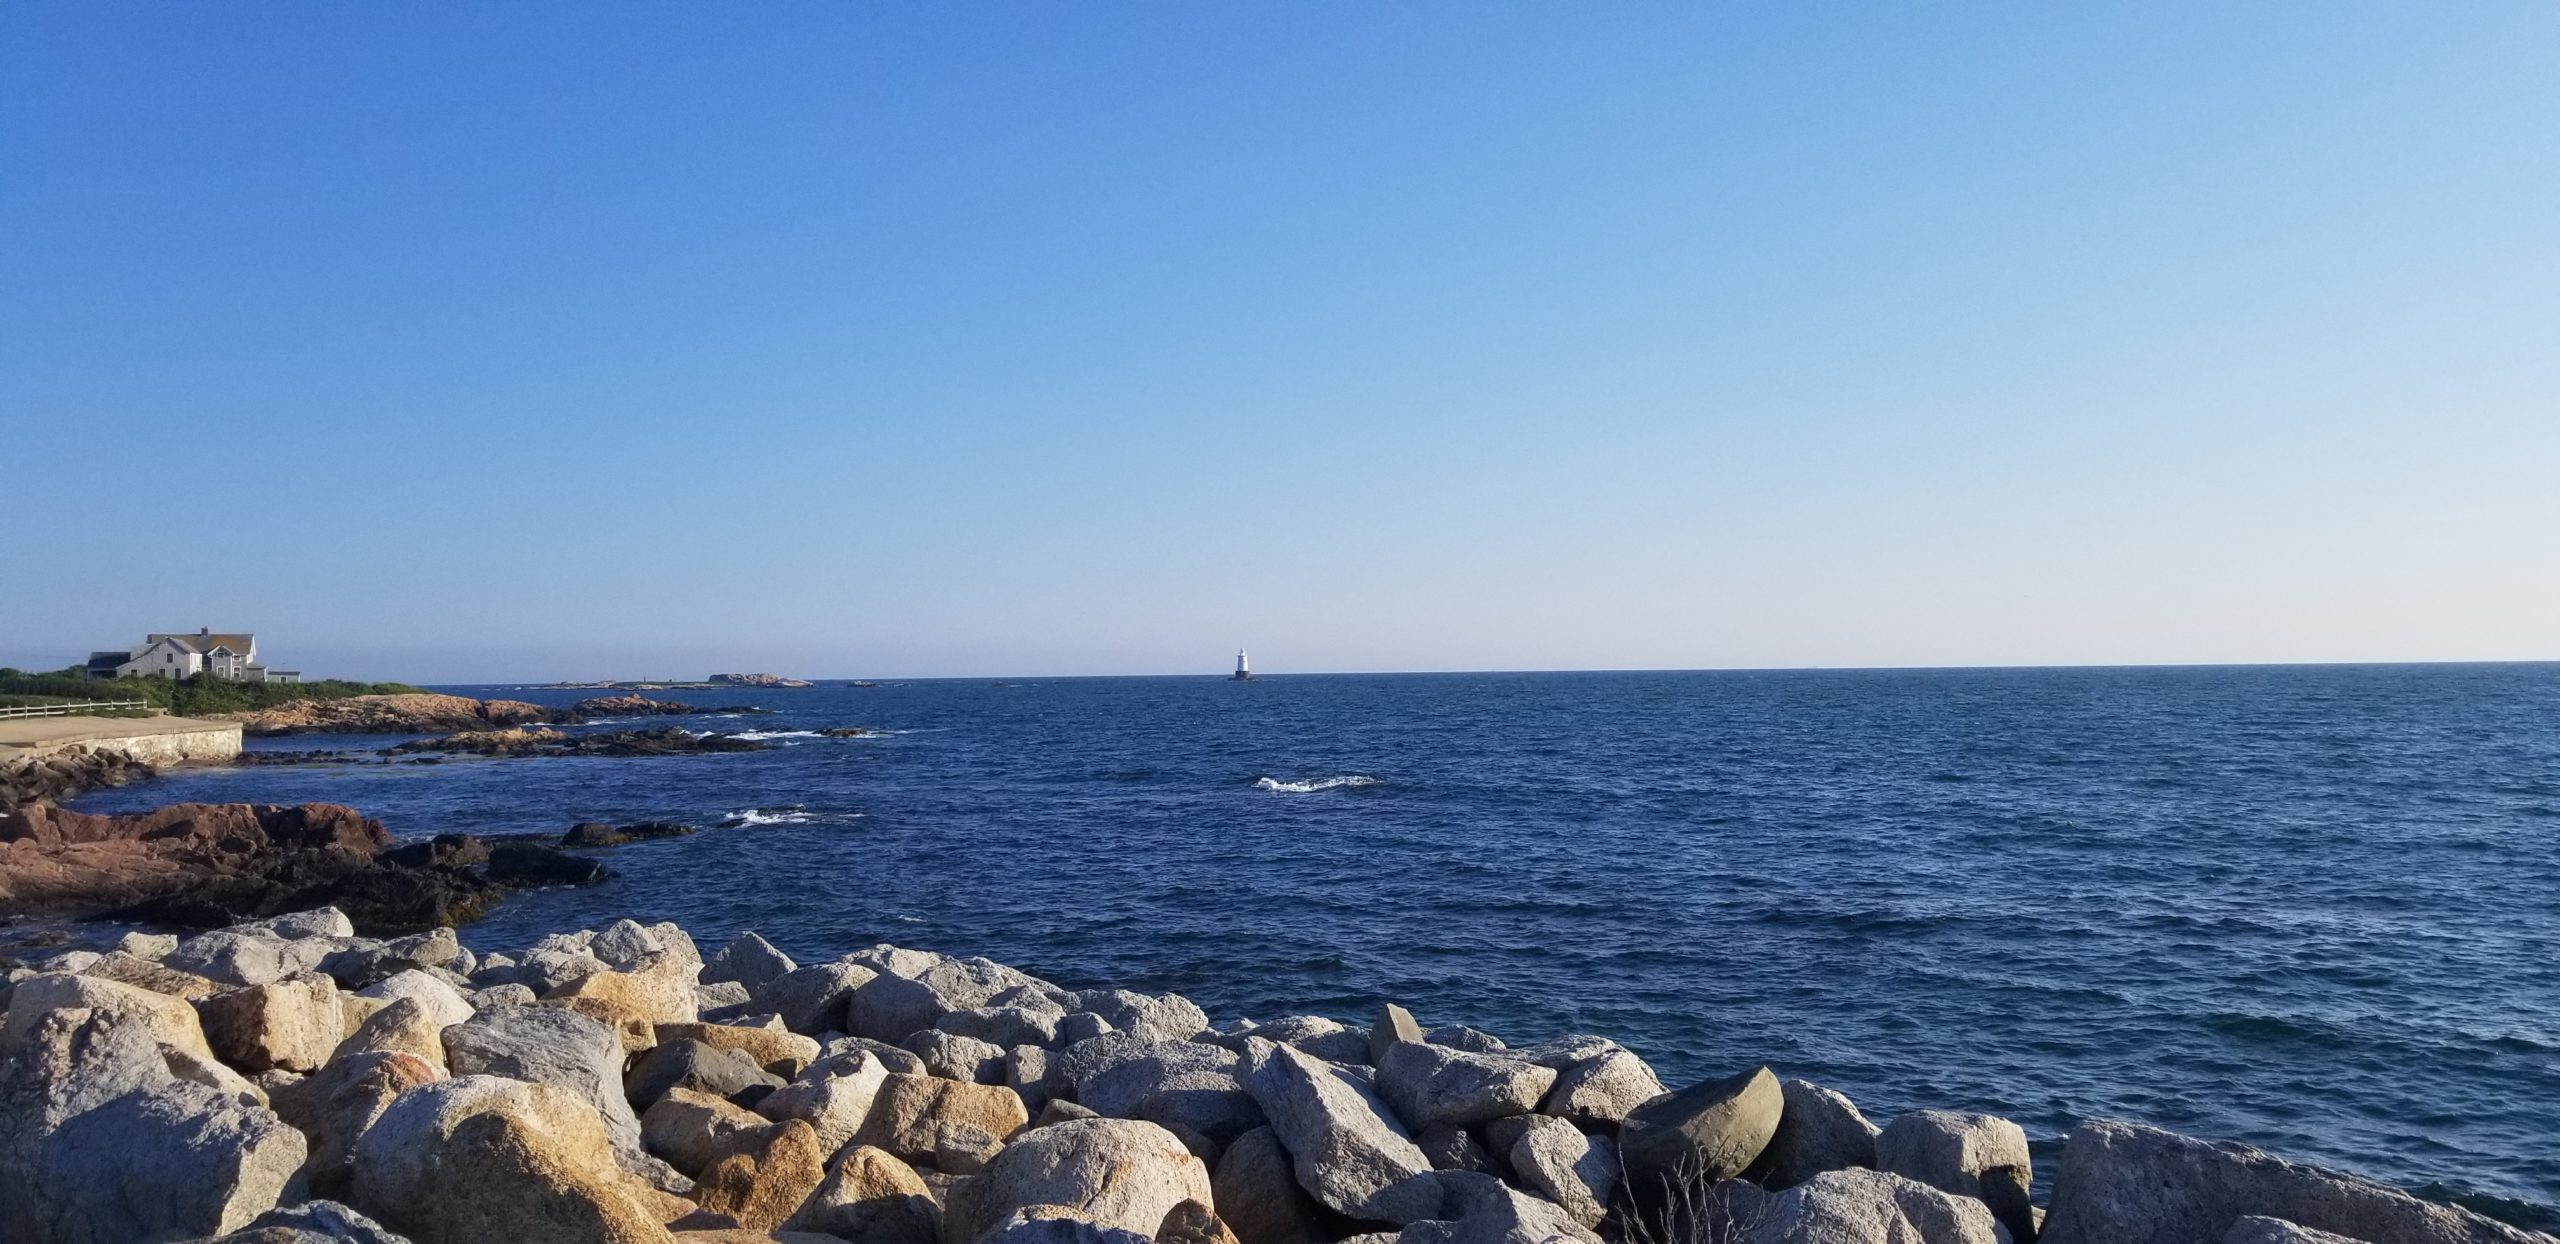 View of the lighthouse at Breakwater Point, Little Compton, Rhode Island - an experience included in the Tour.